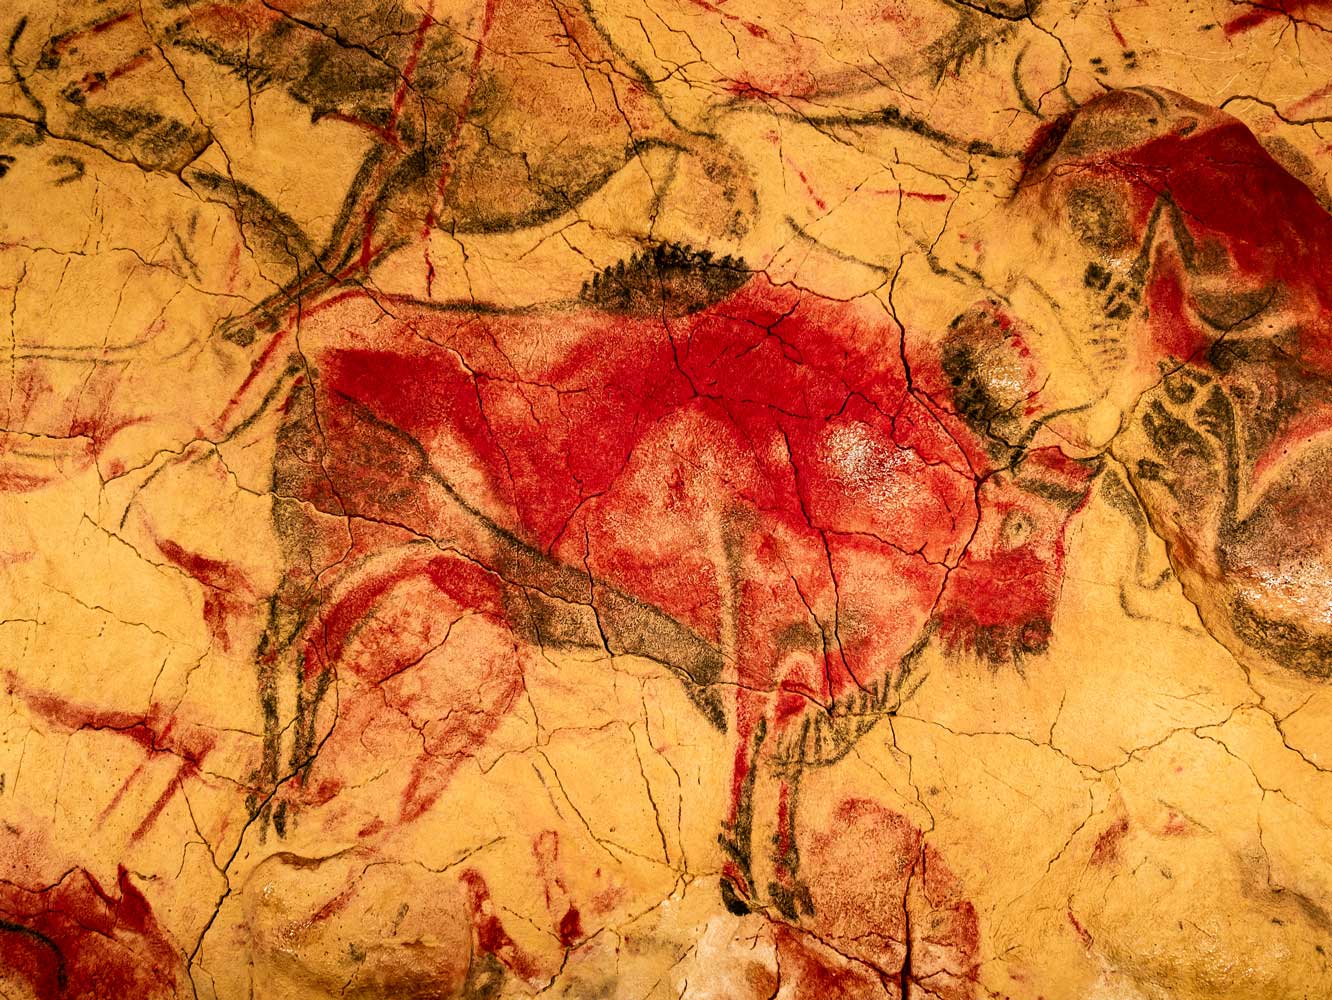 Painting of bison with red earth pigments in Altamira cave wall